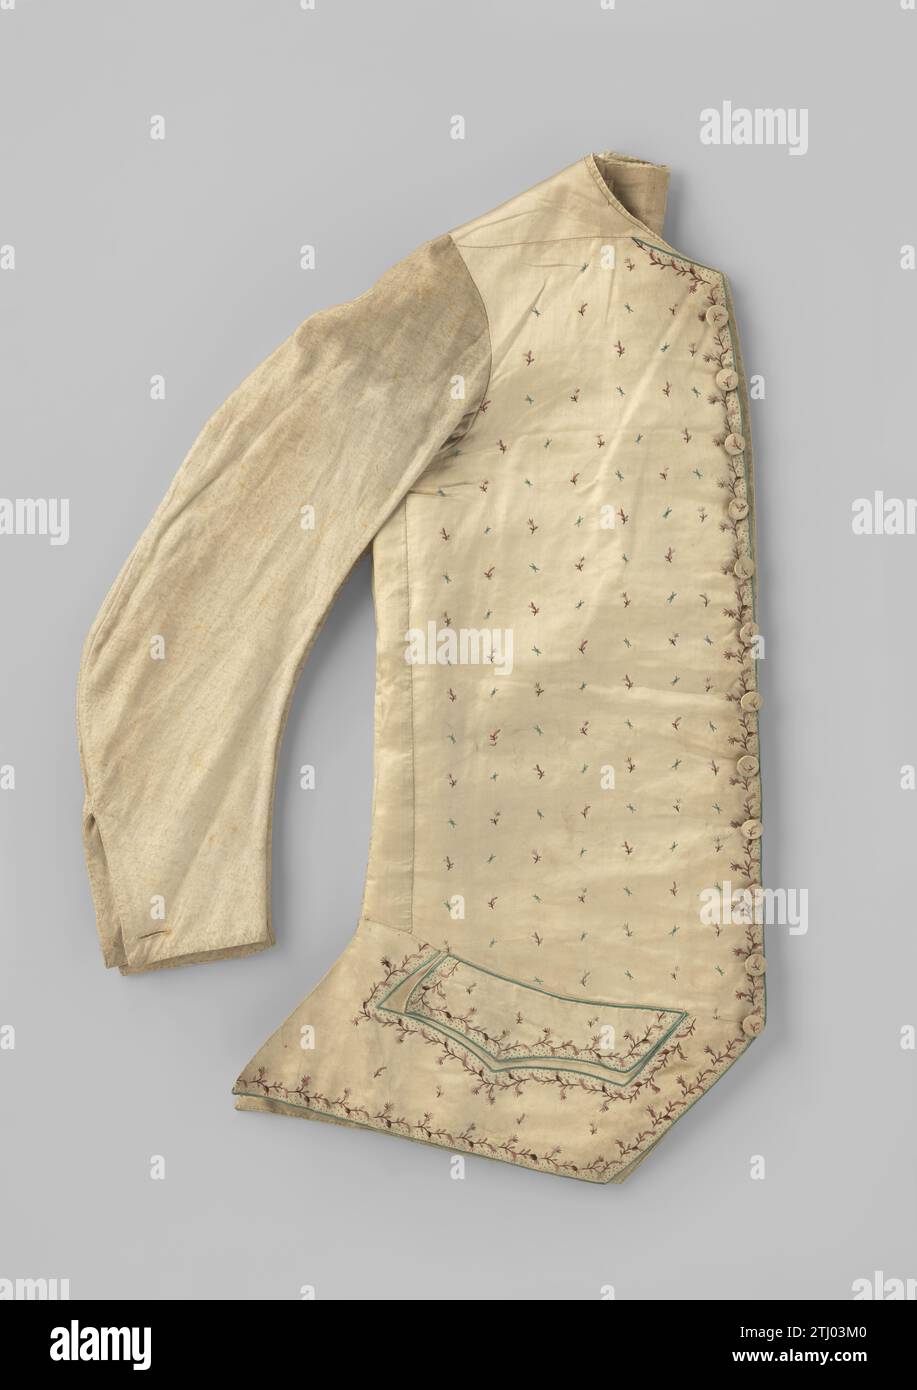 Cardar Satin cardigan, with embroidered floral scatter Motif in brown, cream and green and fine flower and leaf vessels in brown, pink, cream and green; sleeves and back of white flannel, anonymous, 1770 Cardigan of white silk satin, embroidered purple and green flower fits. White rusted linen sleeves. No collar, closed back.  silk. linen (material). satin. flannel embroidering Cardigan of white silk satin, embroidered purple and green flower fits. White rusted linen sleeves. No collar, closed back.  silk. linen (material). satin. flannel embroidering Stock Photo